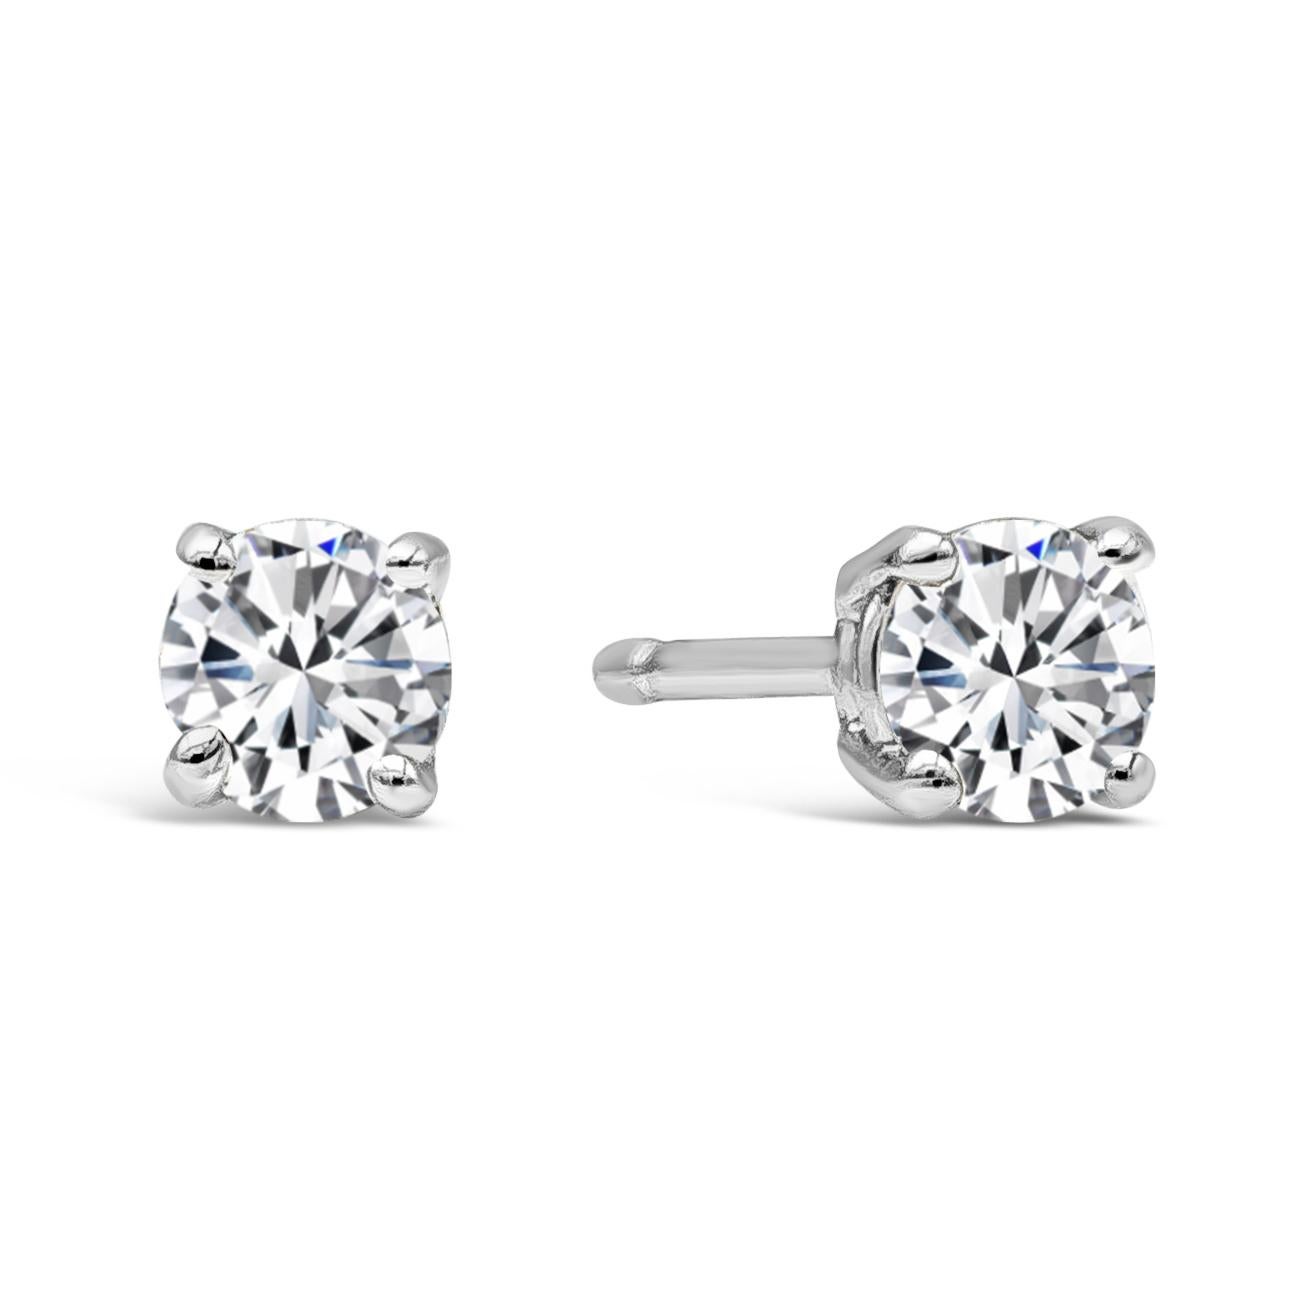 Two perfectly matched timeless stud earring set into a refined four prong mounting with standard friction backs to match any style. Perennial stud earrings showcasing 0.30 carat round brilliant diamonds with G color and SI clarity. Flawlessly set on